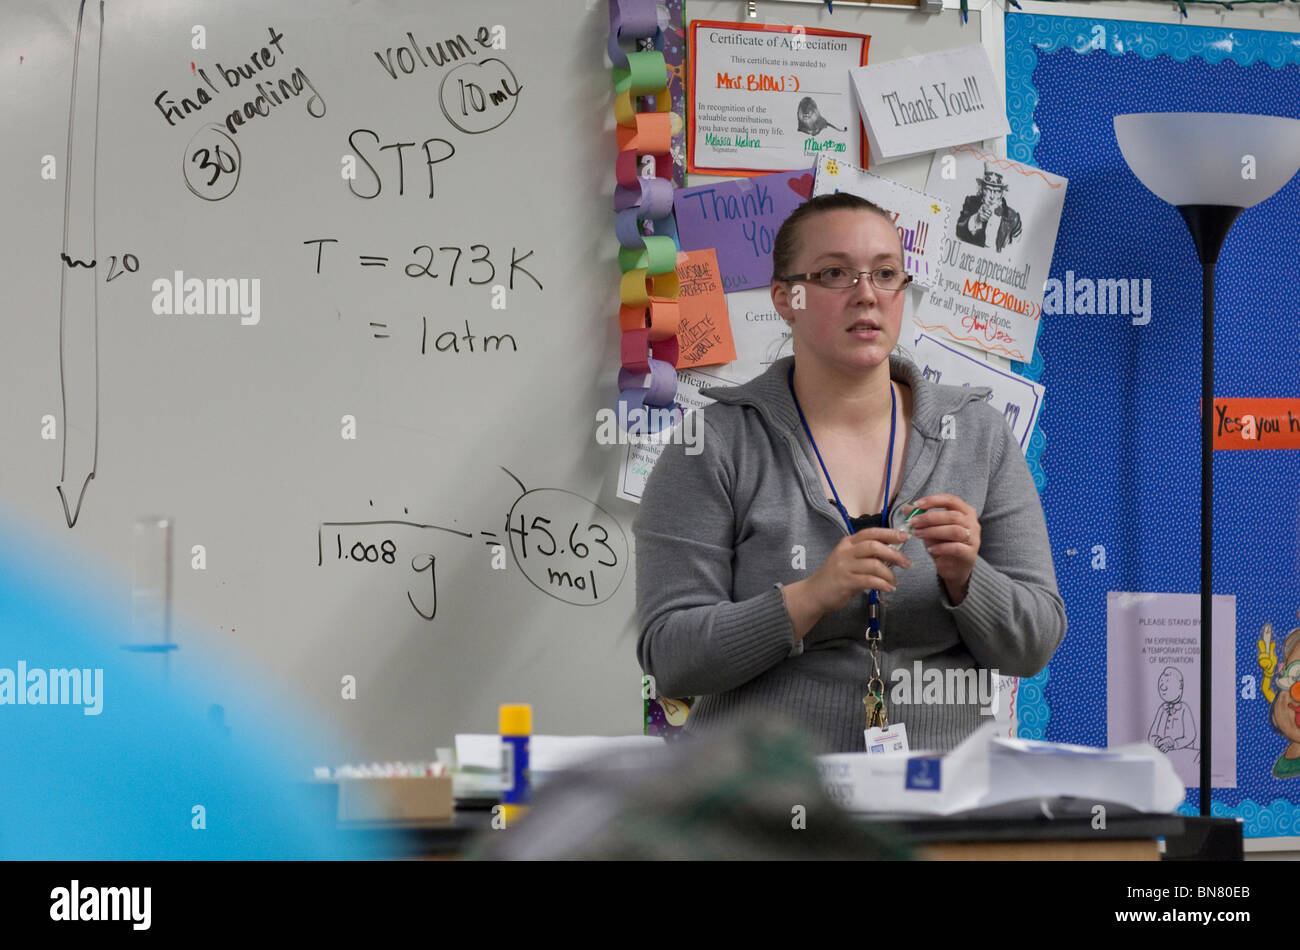 Anglo female high school science teacher explains experiment procedures to class. Stock Photo